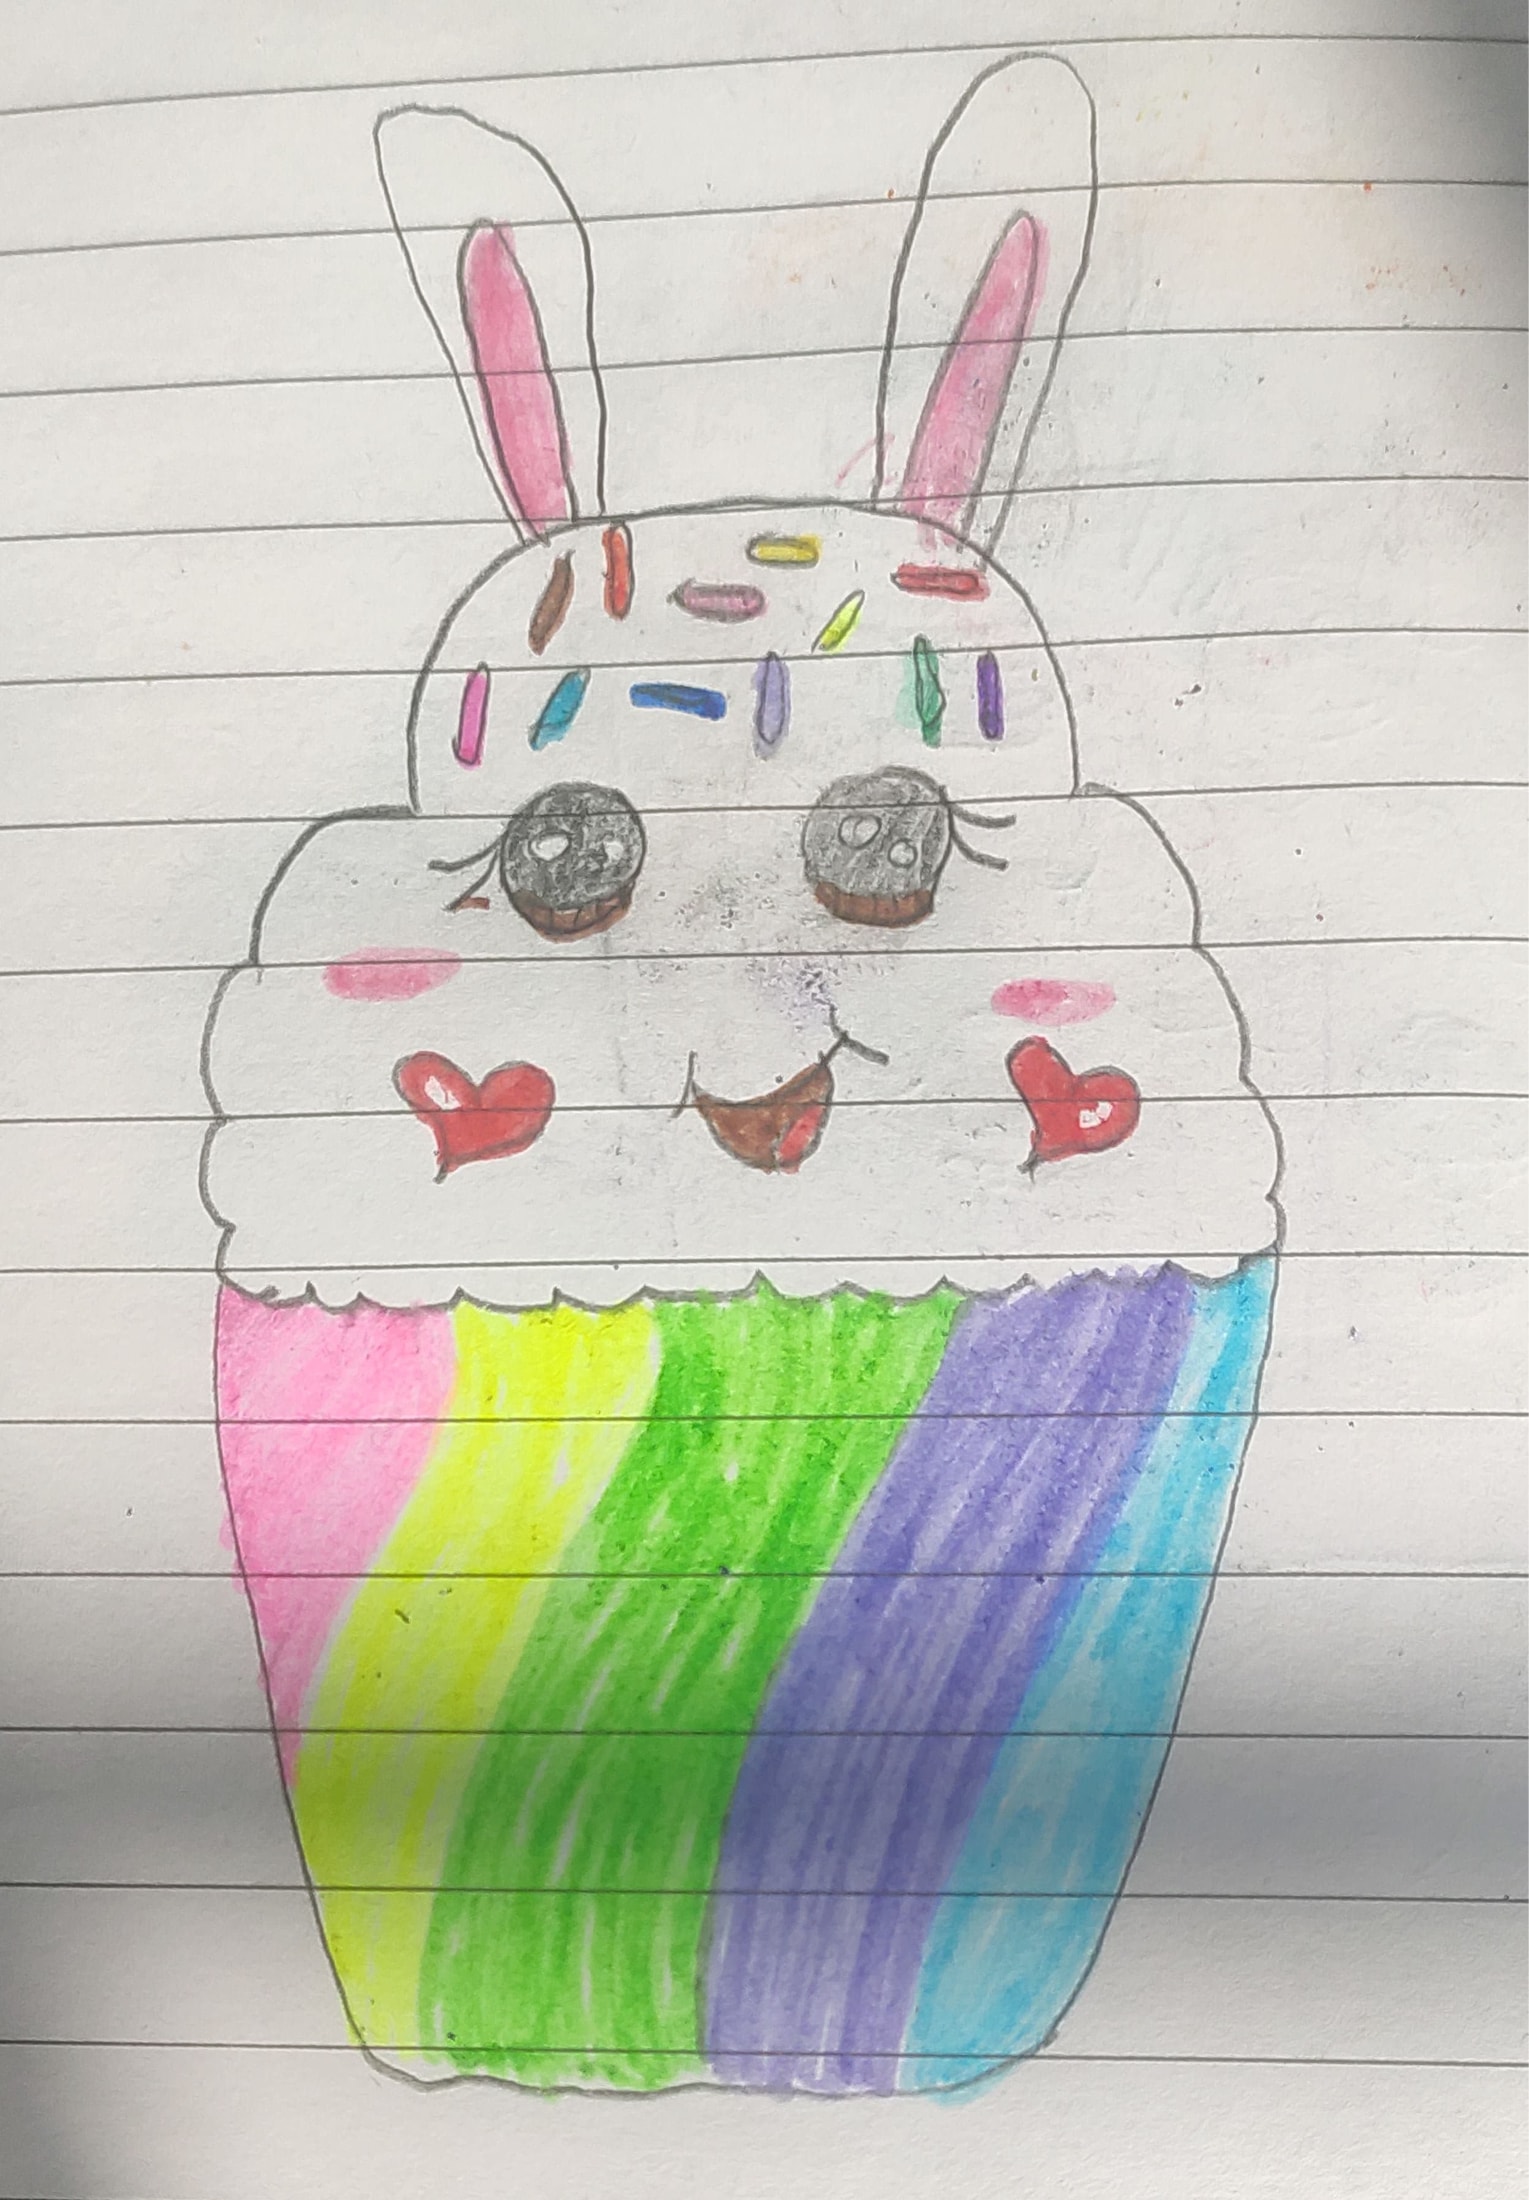 Drawing of unicorn cupcakes by my daughter